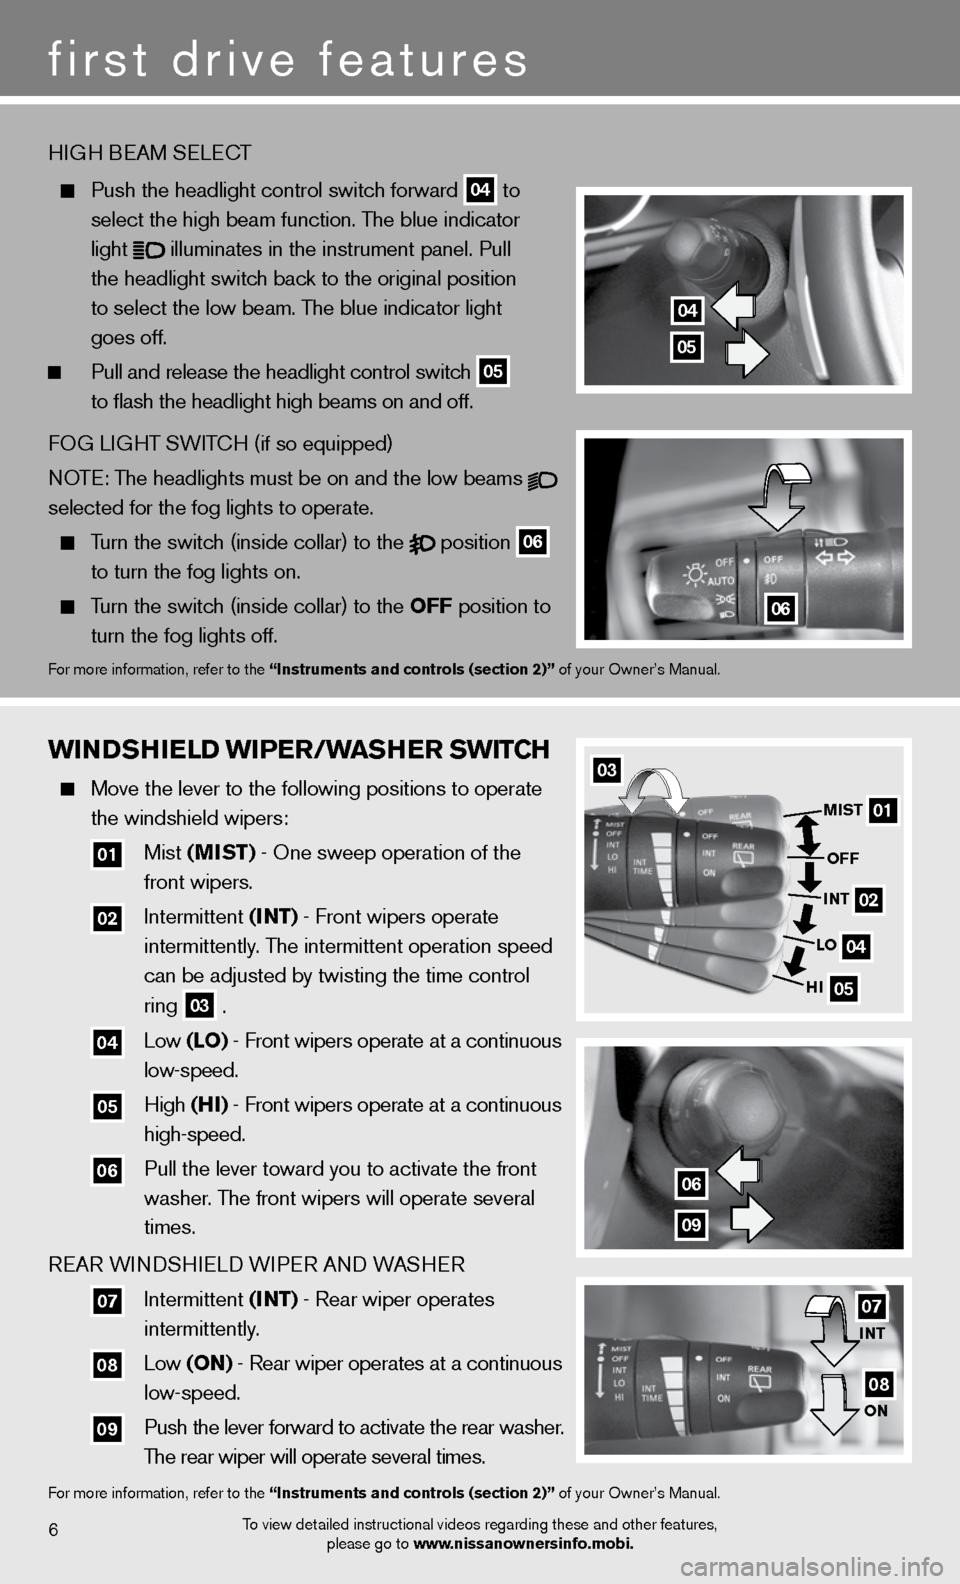 NISSAN ARMADA 2012 1.G Quick Reference Guide WinDshiEl D WiPEr/W ashEr sW itCh
   Move the lever to the following positions to operate 
    the windshield wipers:   
  
01 Mist  (mist) - One sweep operation of the   
     front wipers.  
  
02 i